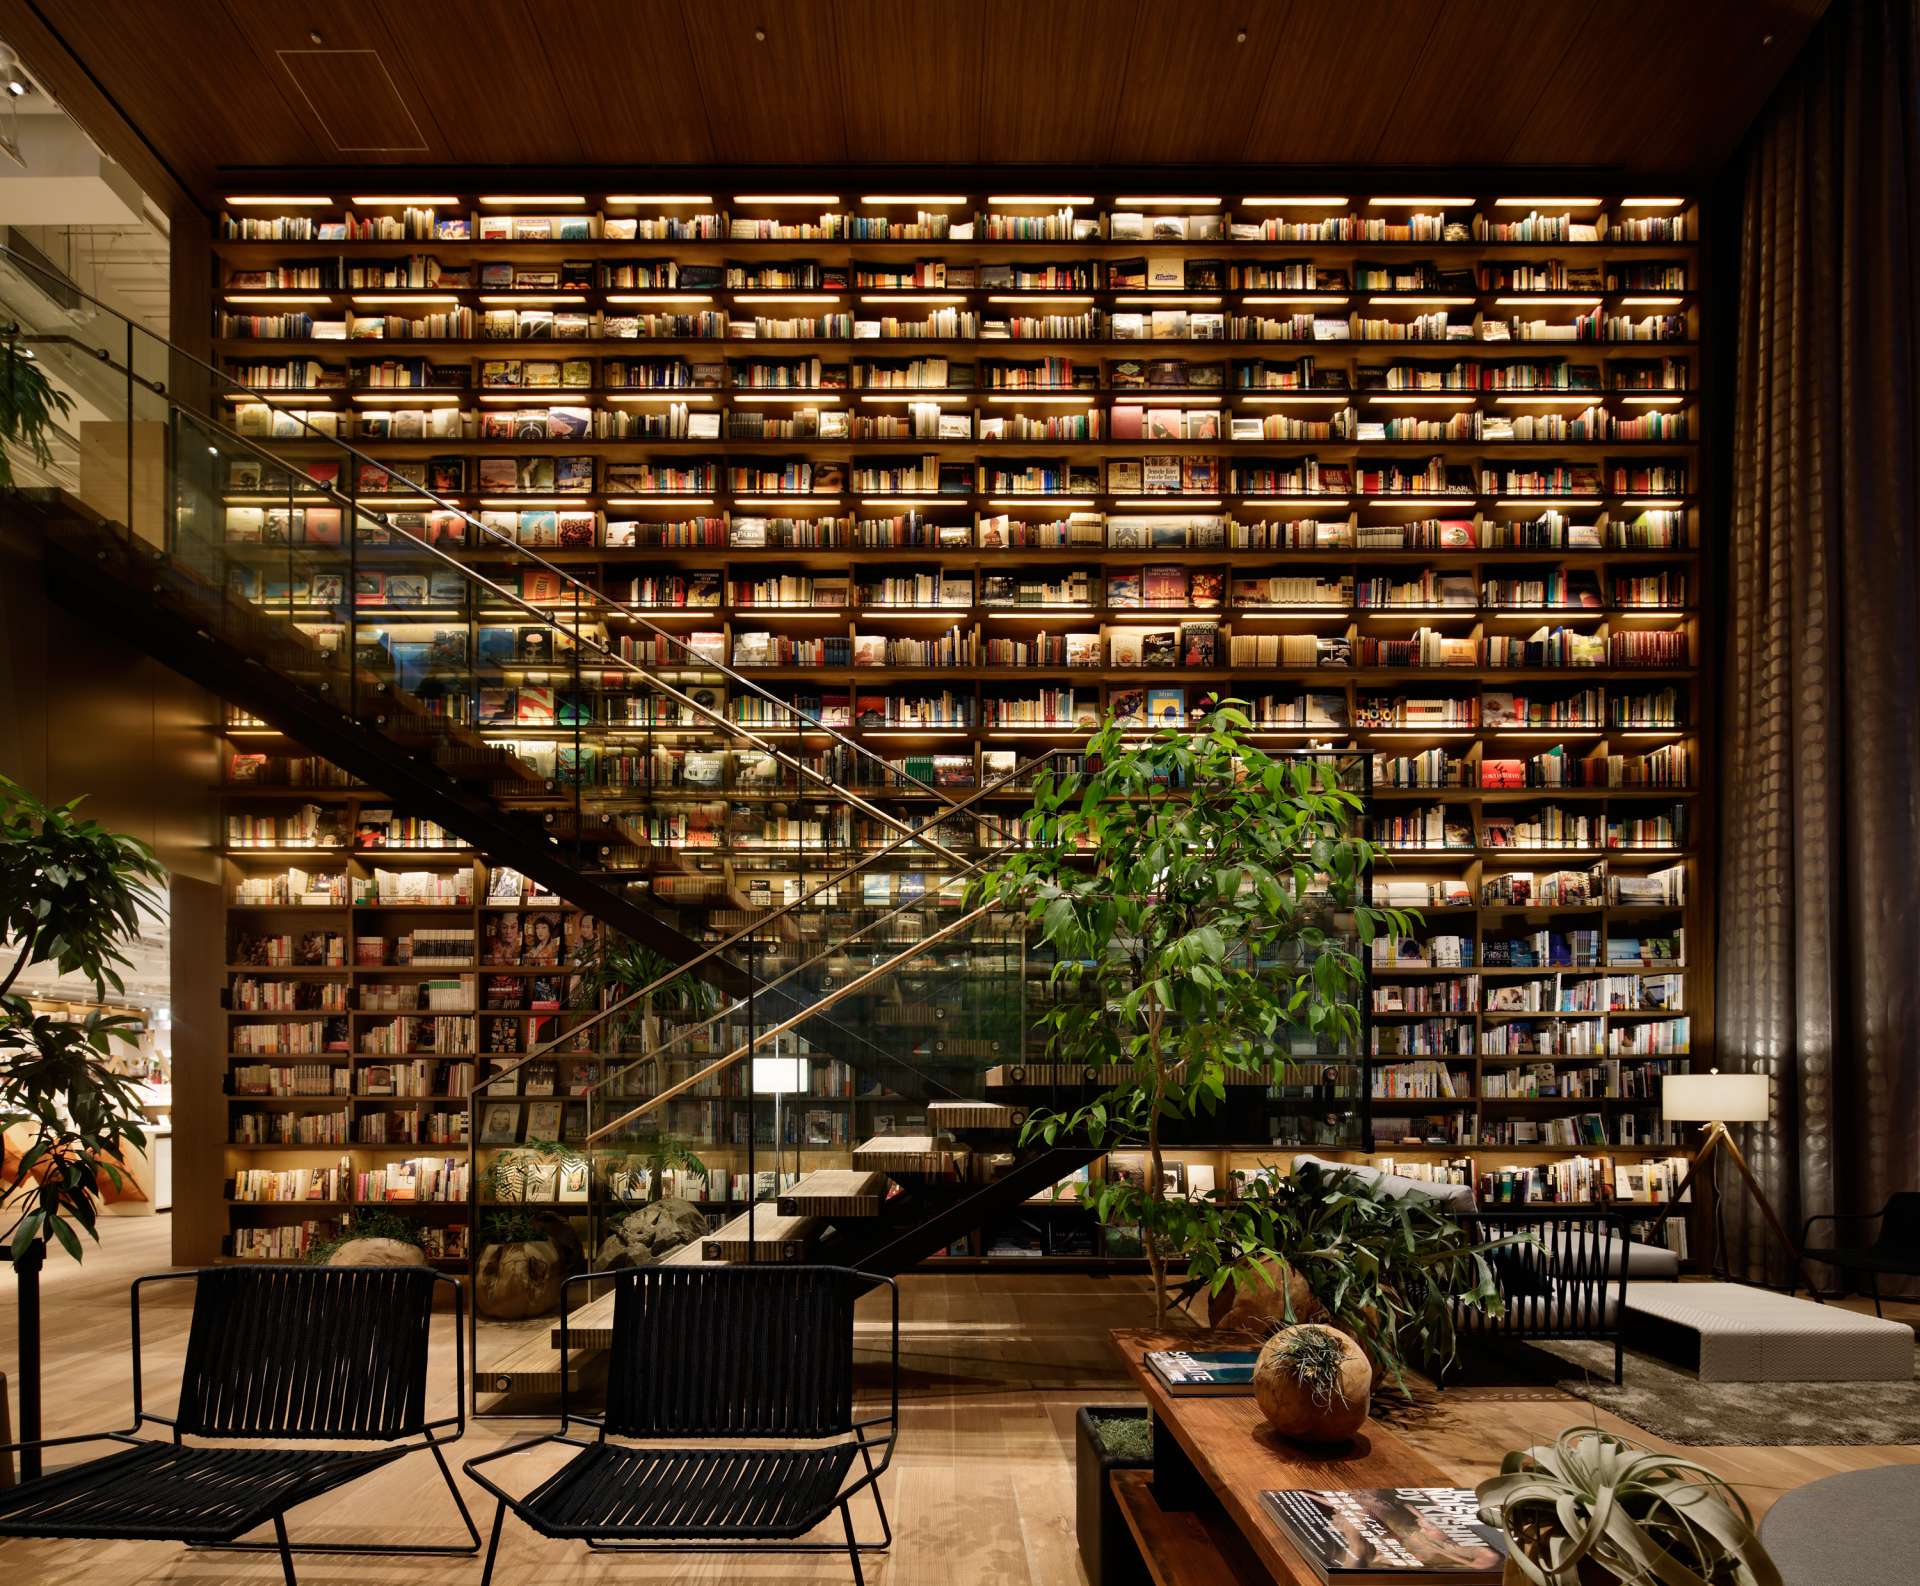 The 7-meter high photogenic bookshelf is a breathtaking view. A must-see for book lovers.